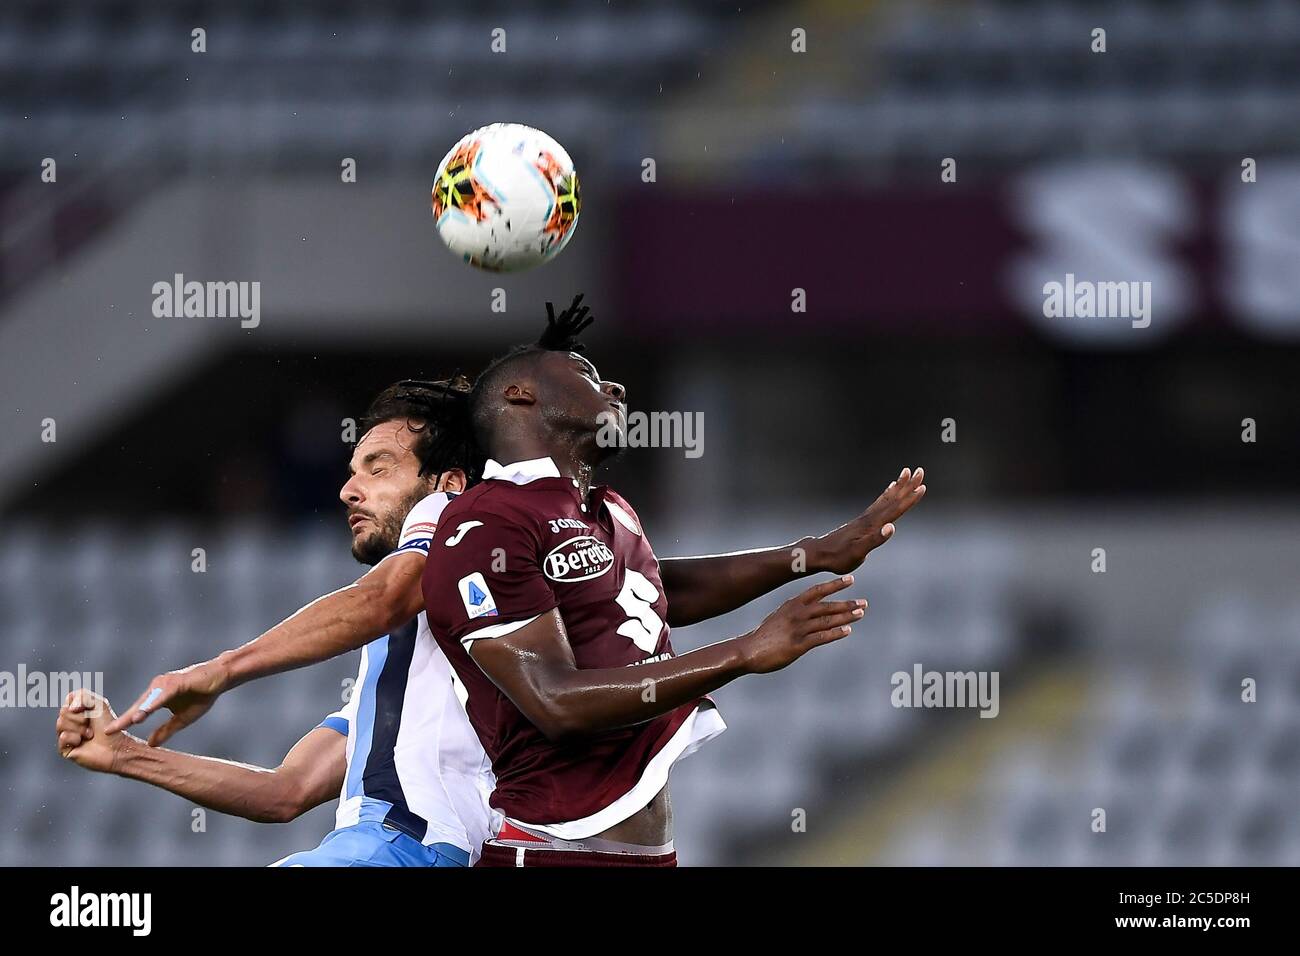 Turin, Italy. 30th June, 2020. TURIN, ITALY - June 30, 2020: Marco Parolo of SS Lazio competes for a header with Soualiho Meite of Torino FC during the Serie A football match between Torino FC and SS Lazio. (Photo by Nicolò Campo/Sipa USA) Credit: Sipa USA/Alamy Live News Stock Photo